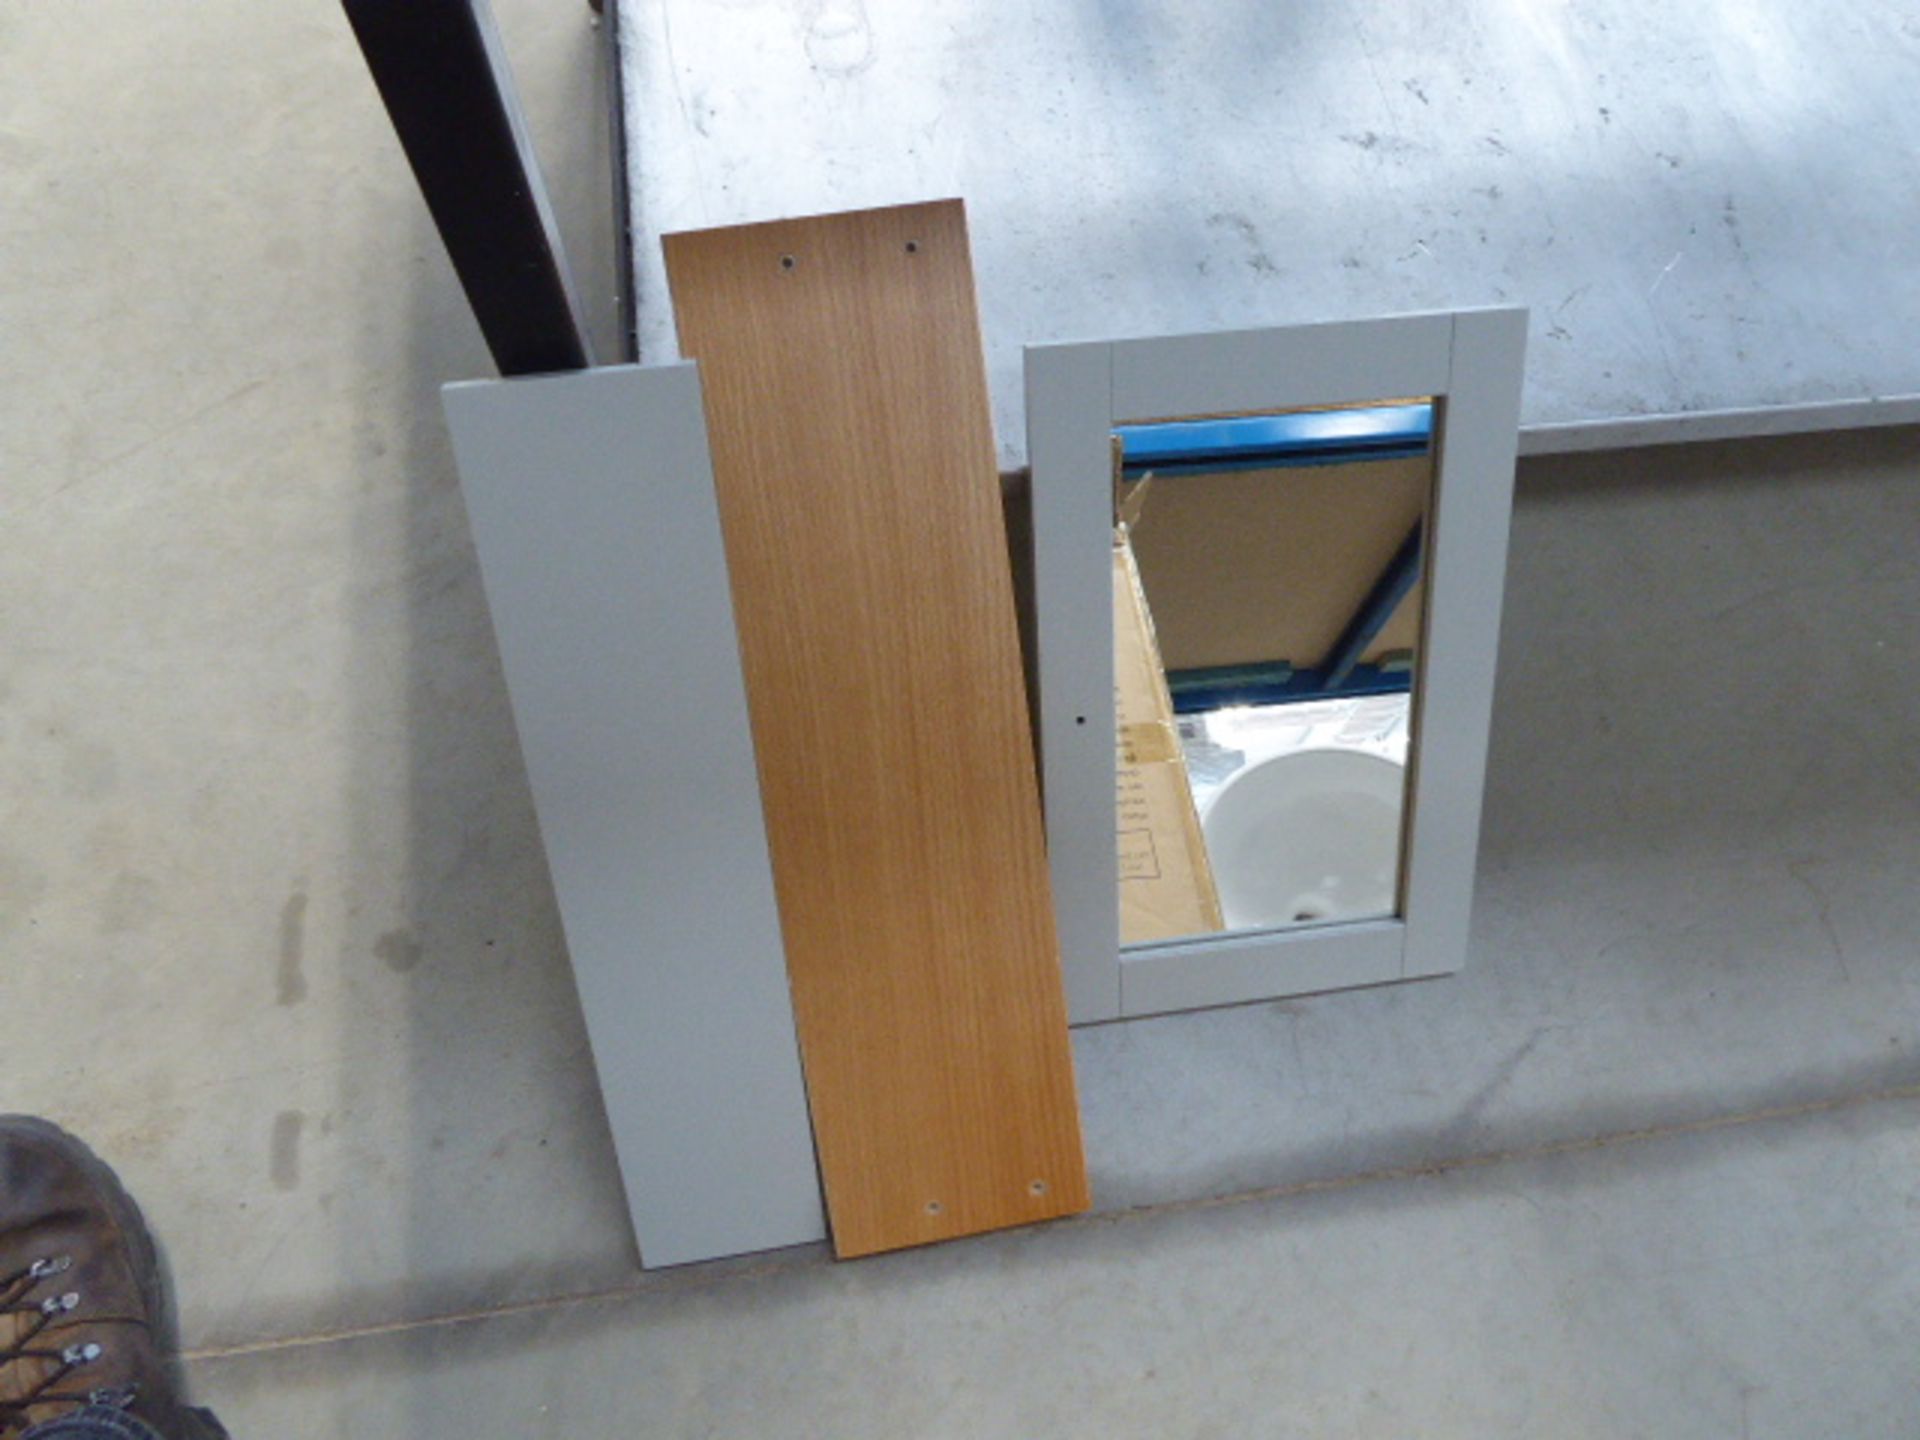 A flat pack mirrored bathroom cabinet